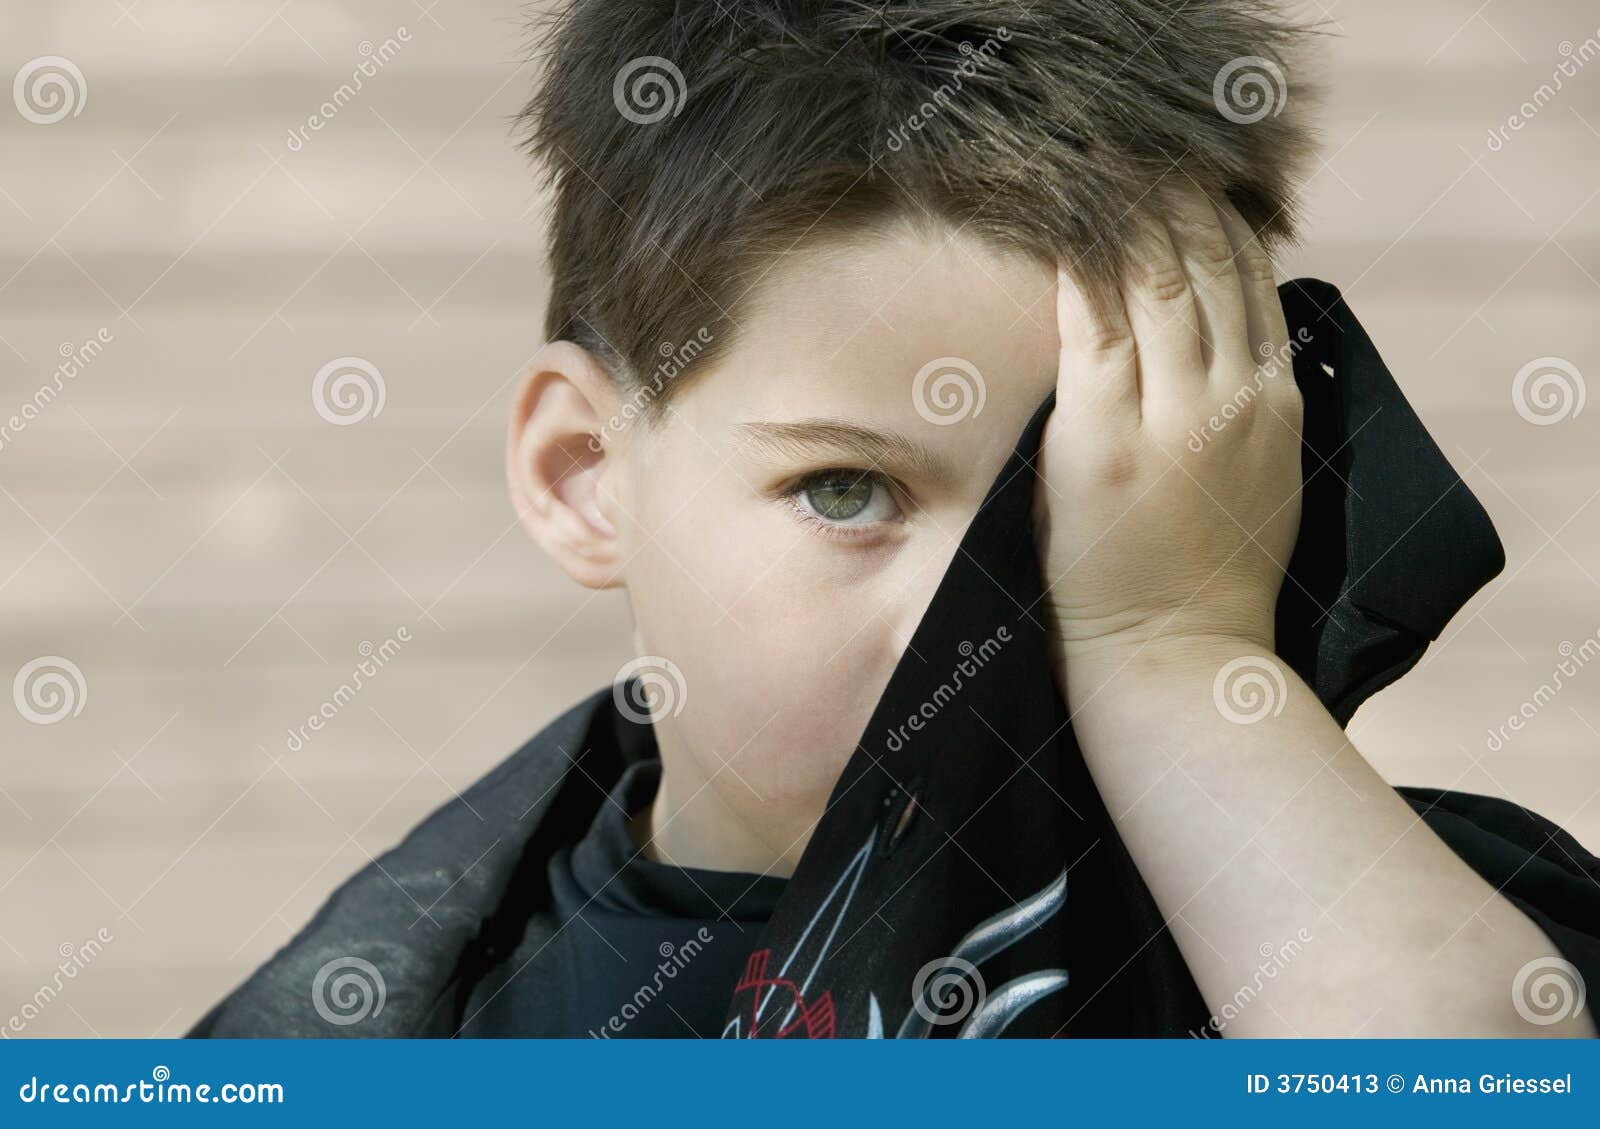 Boy hiding his face stock image. Image of spiked, hide - 3750413